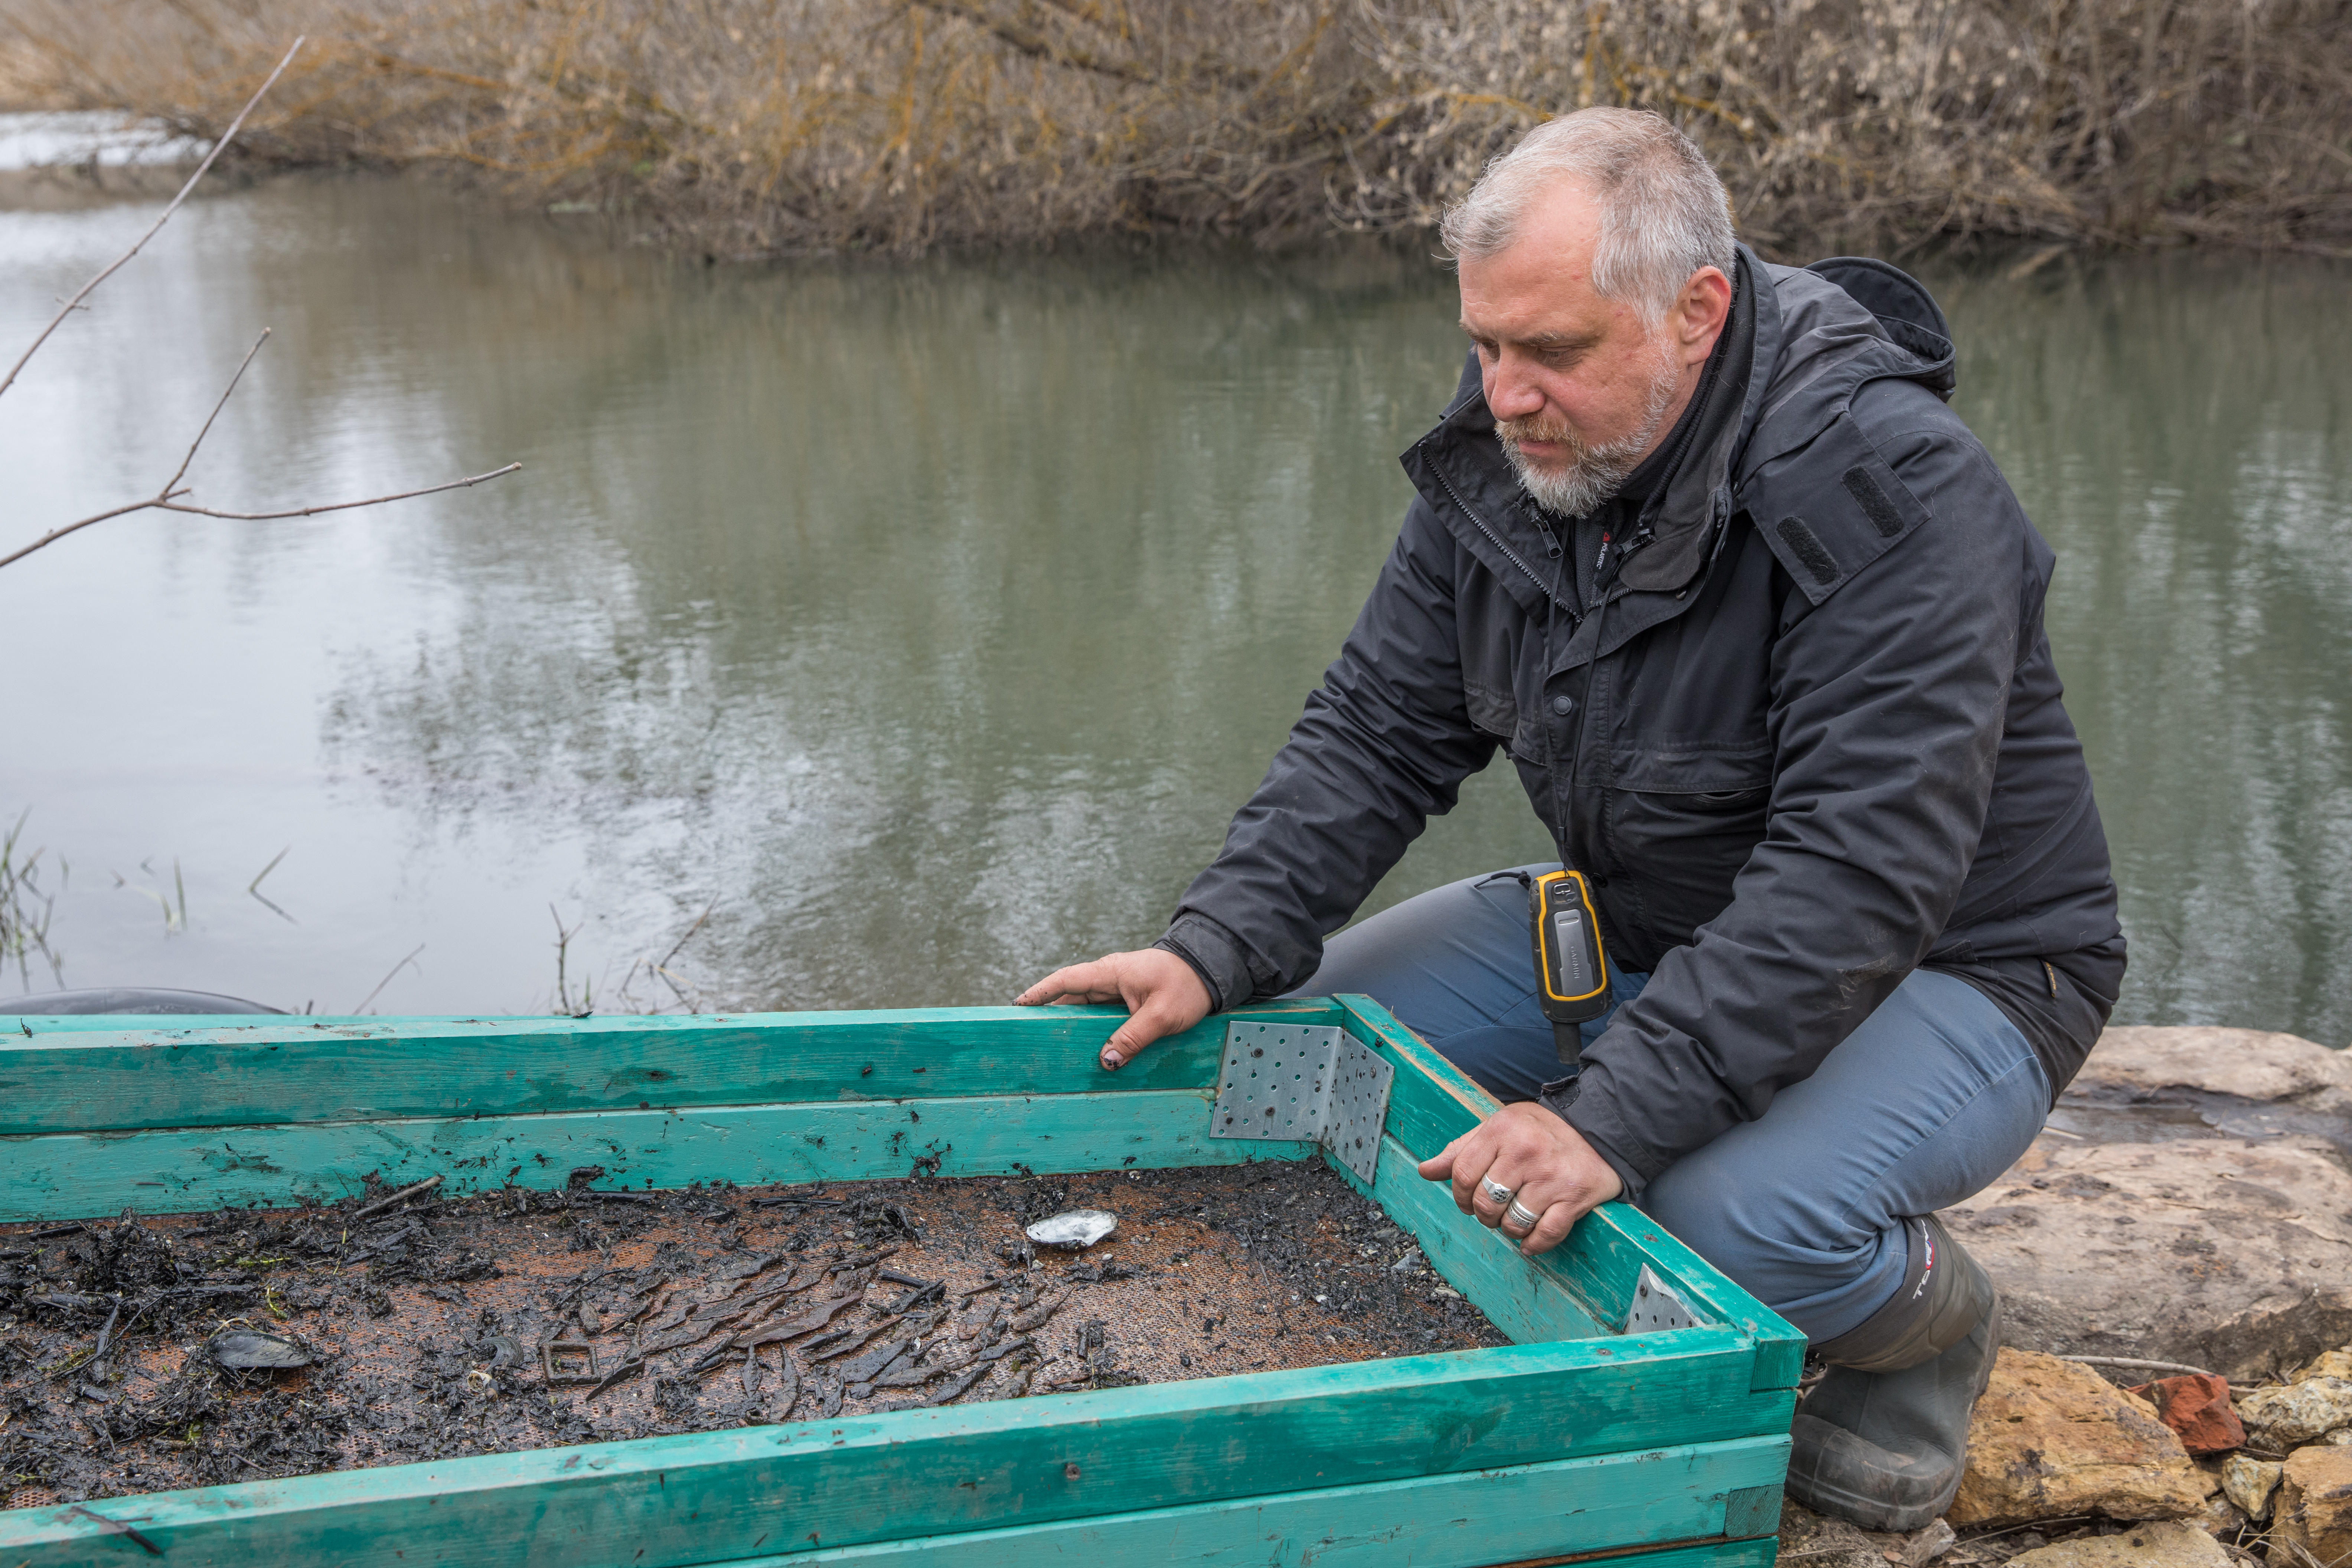 Oleg Radyush is surprised by the findings from the bottom of the river. Photo by Stanislav Trofimov